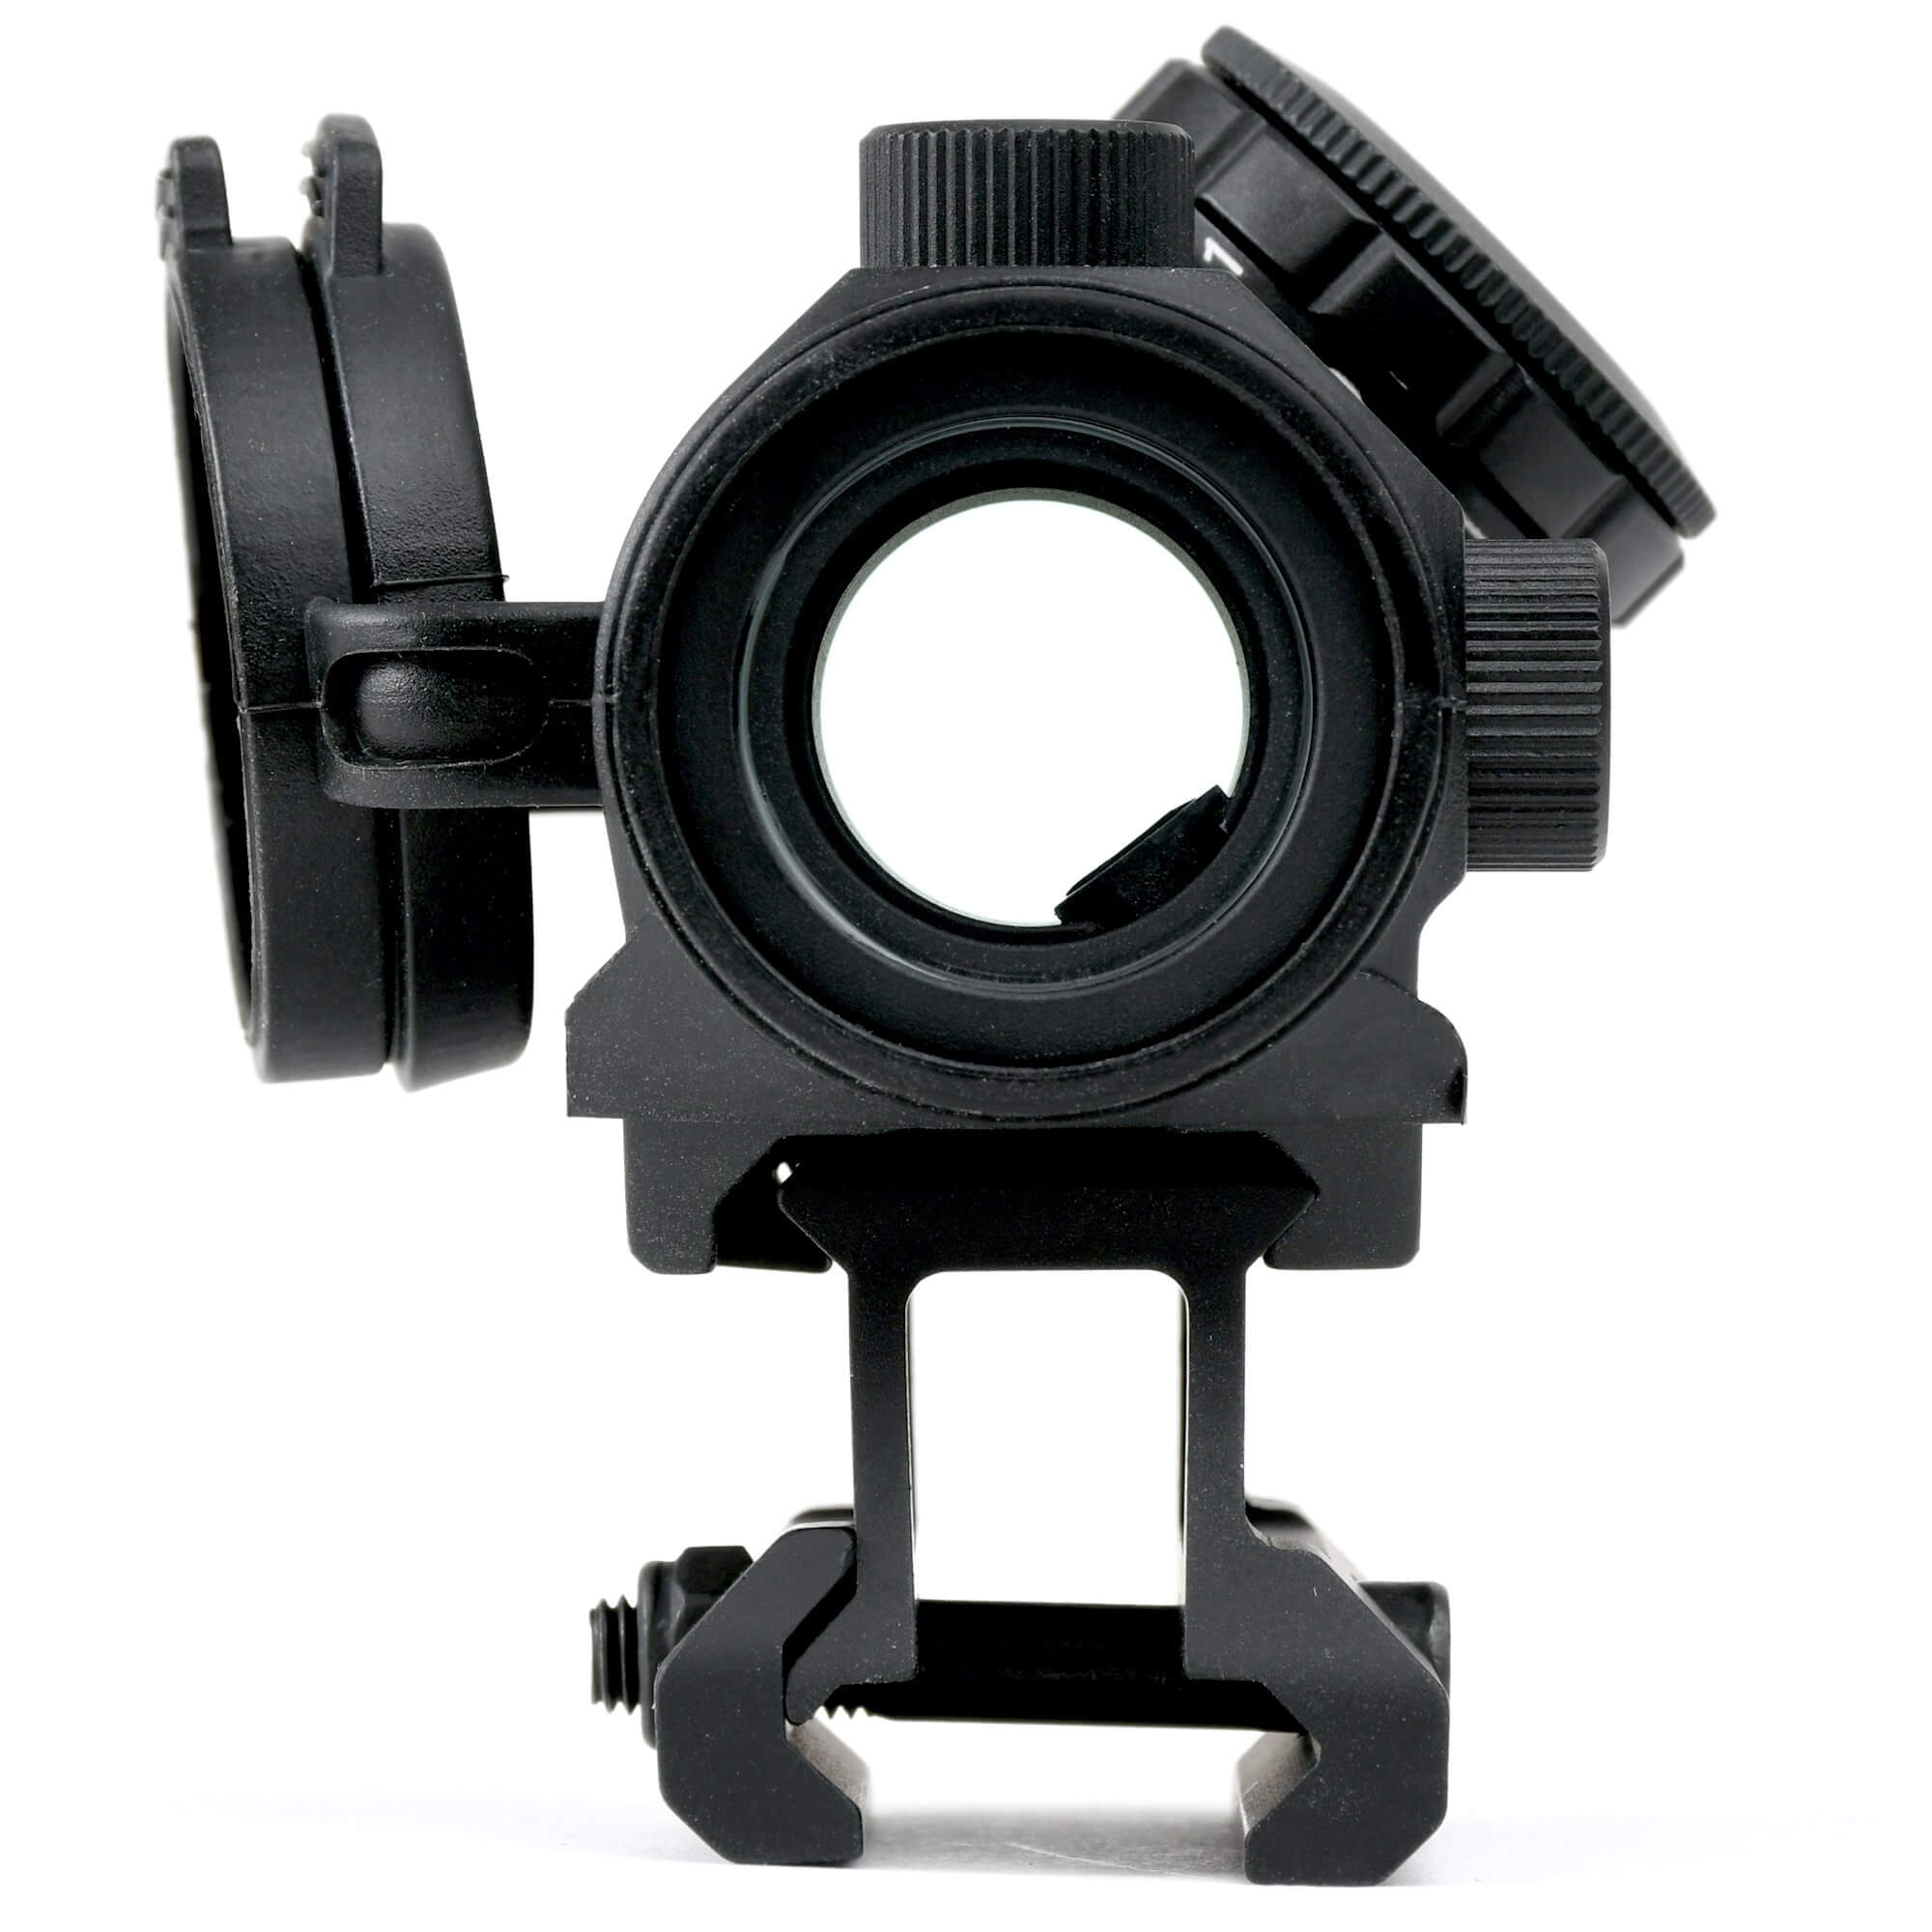 AT3 RD-50 PRO™ Micro Red Dot Reflex Sight w/ Riser Mount & Armor